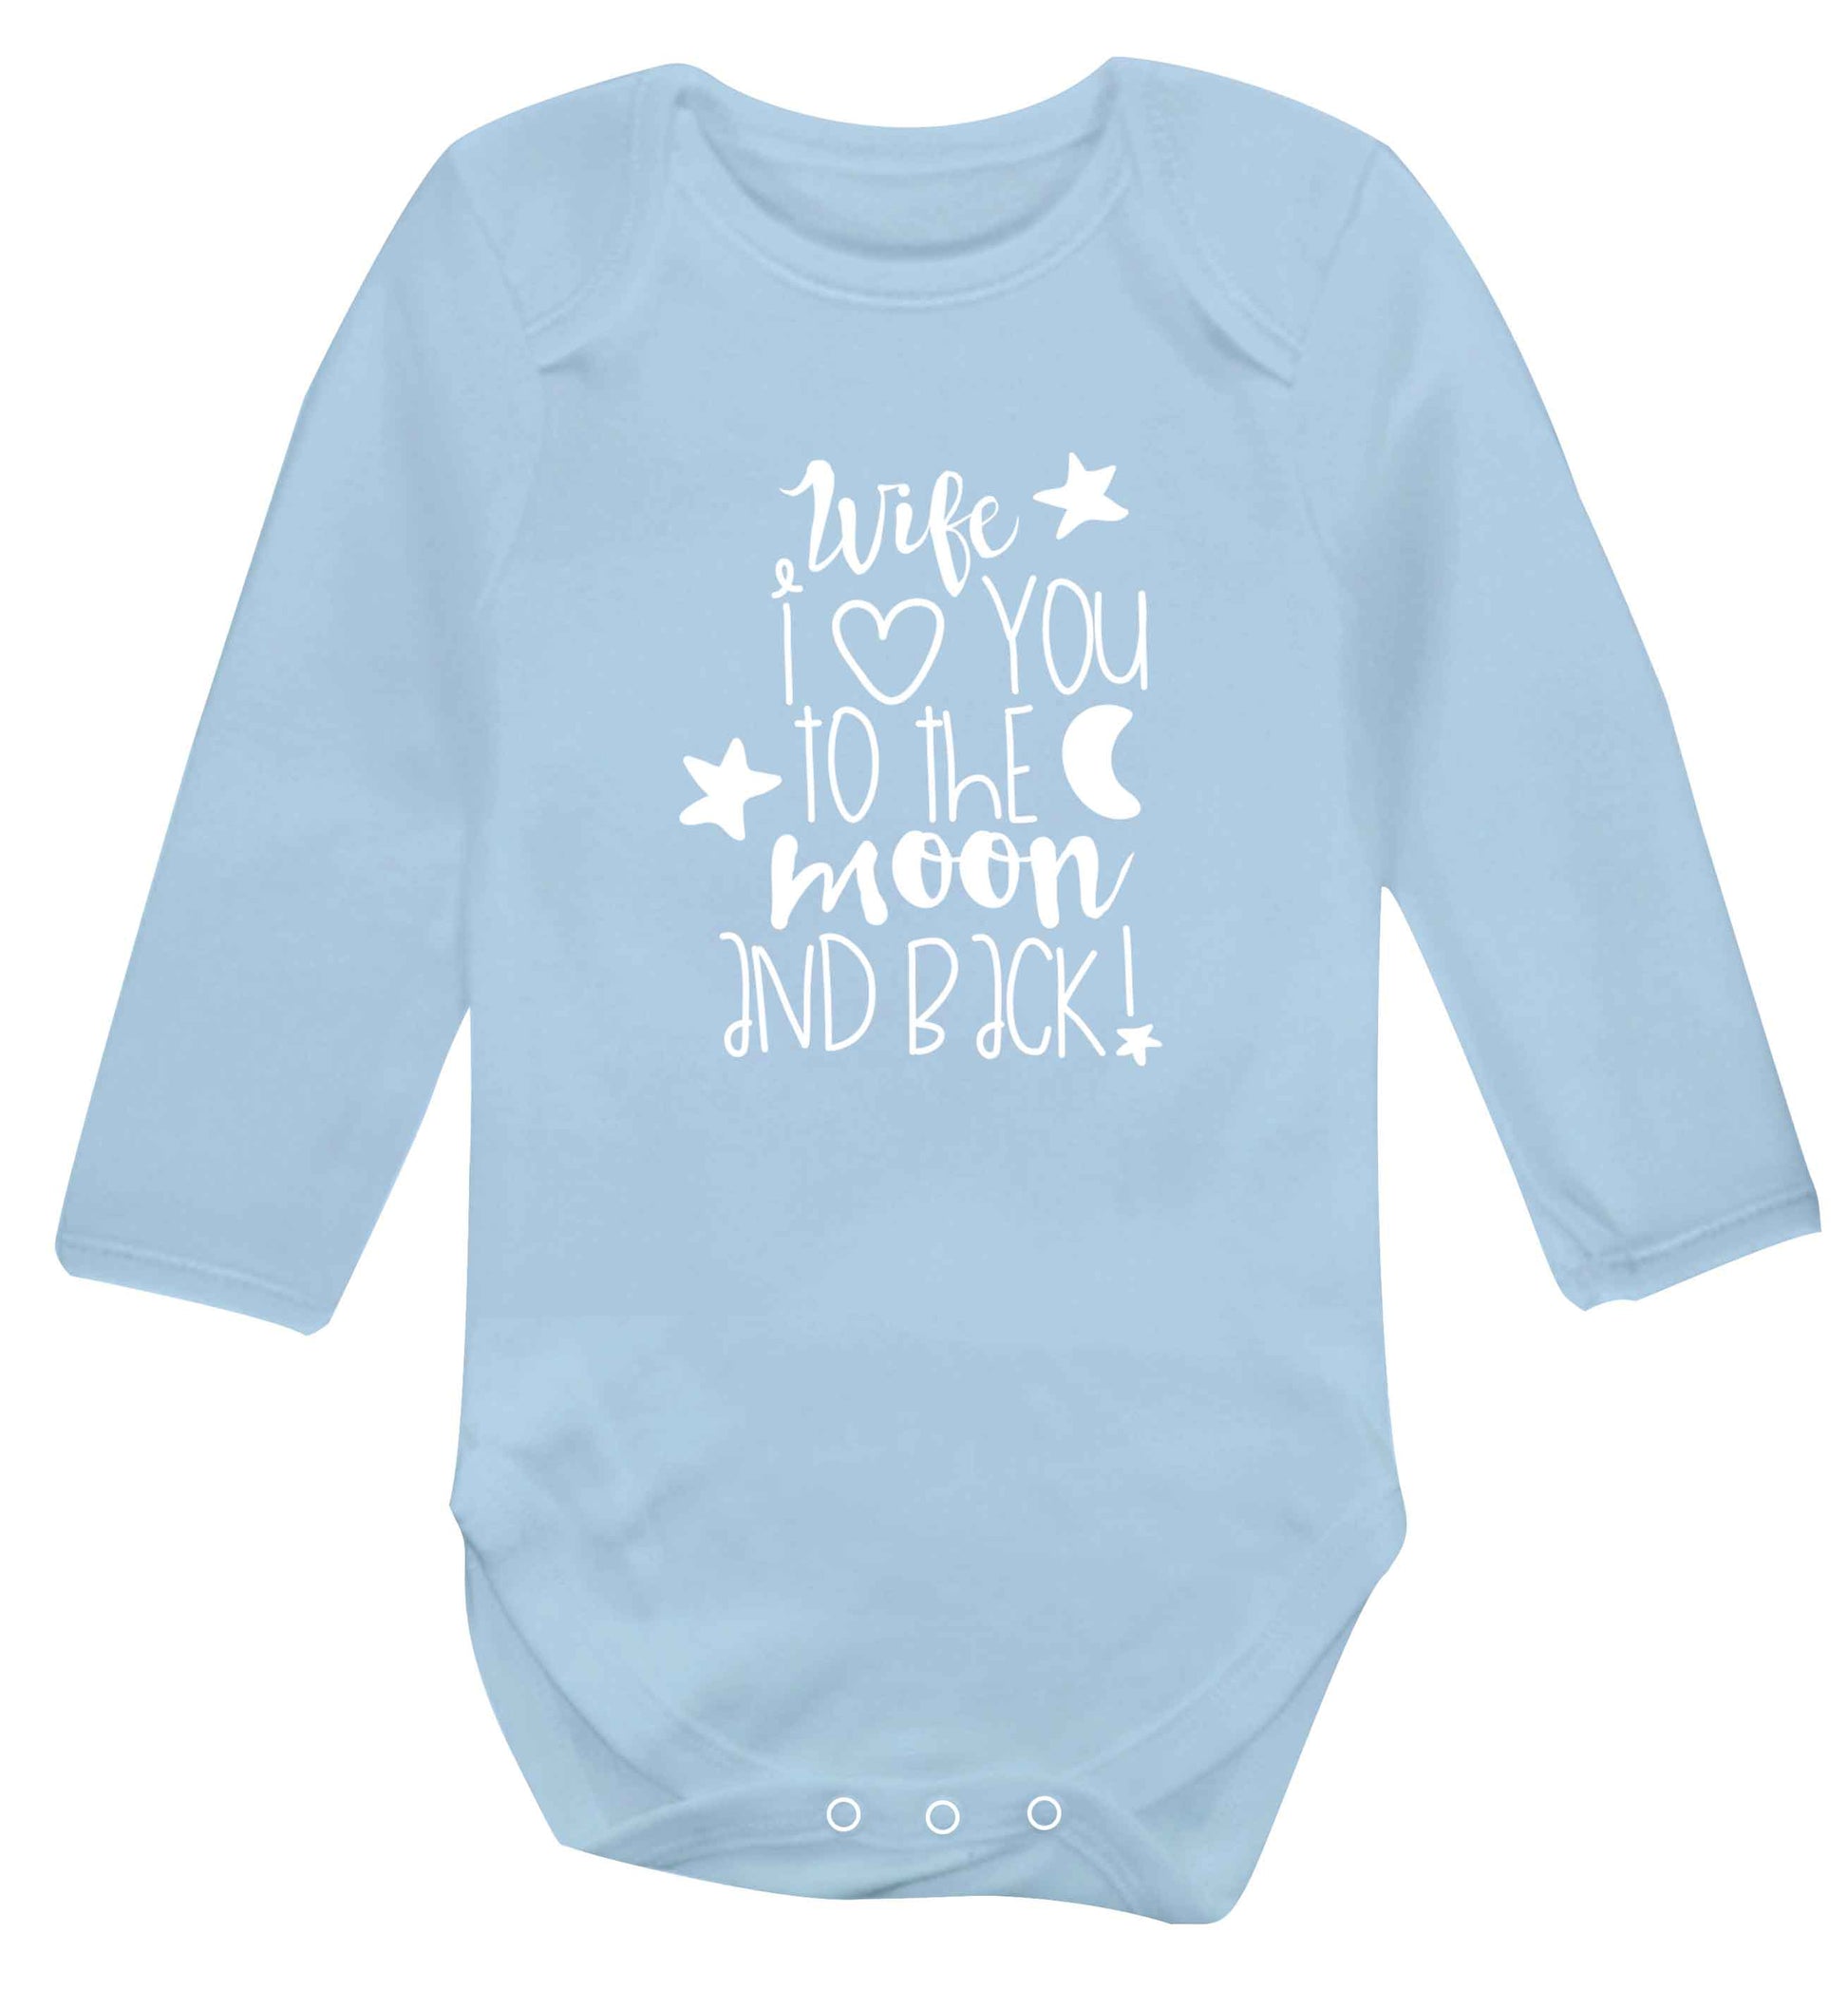 Wife I love you to the moon and back baby vest long sleeved pale blue 6-12 months